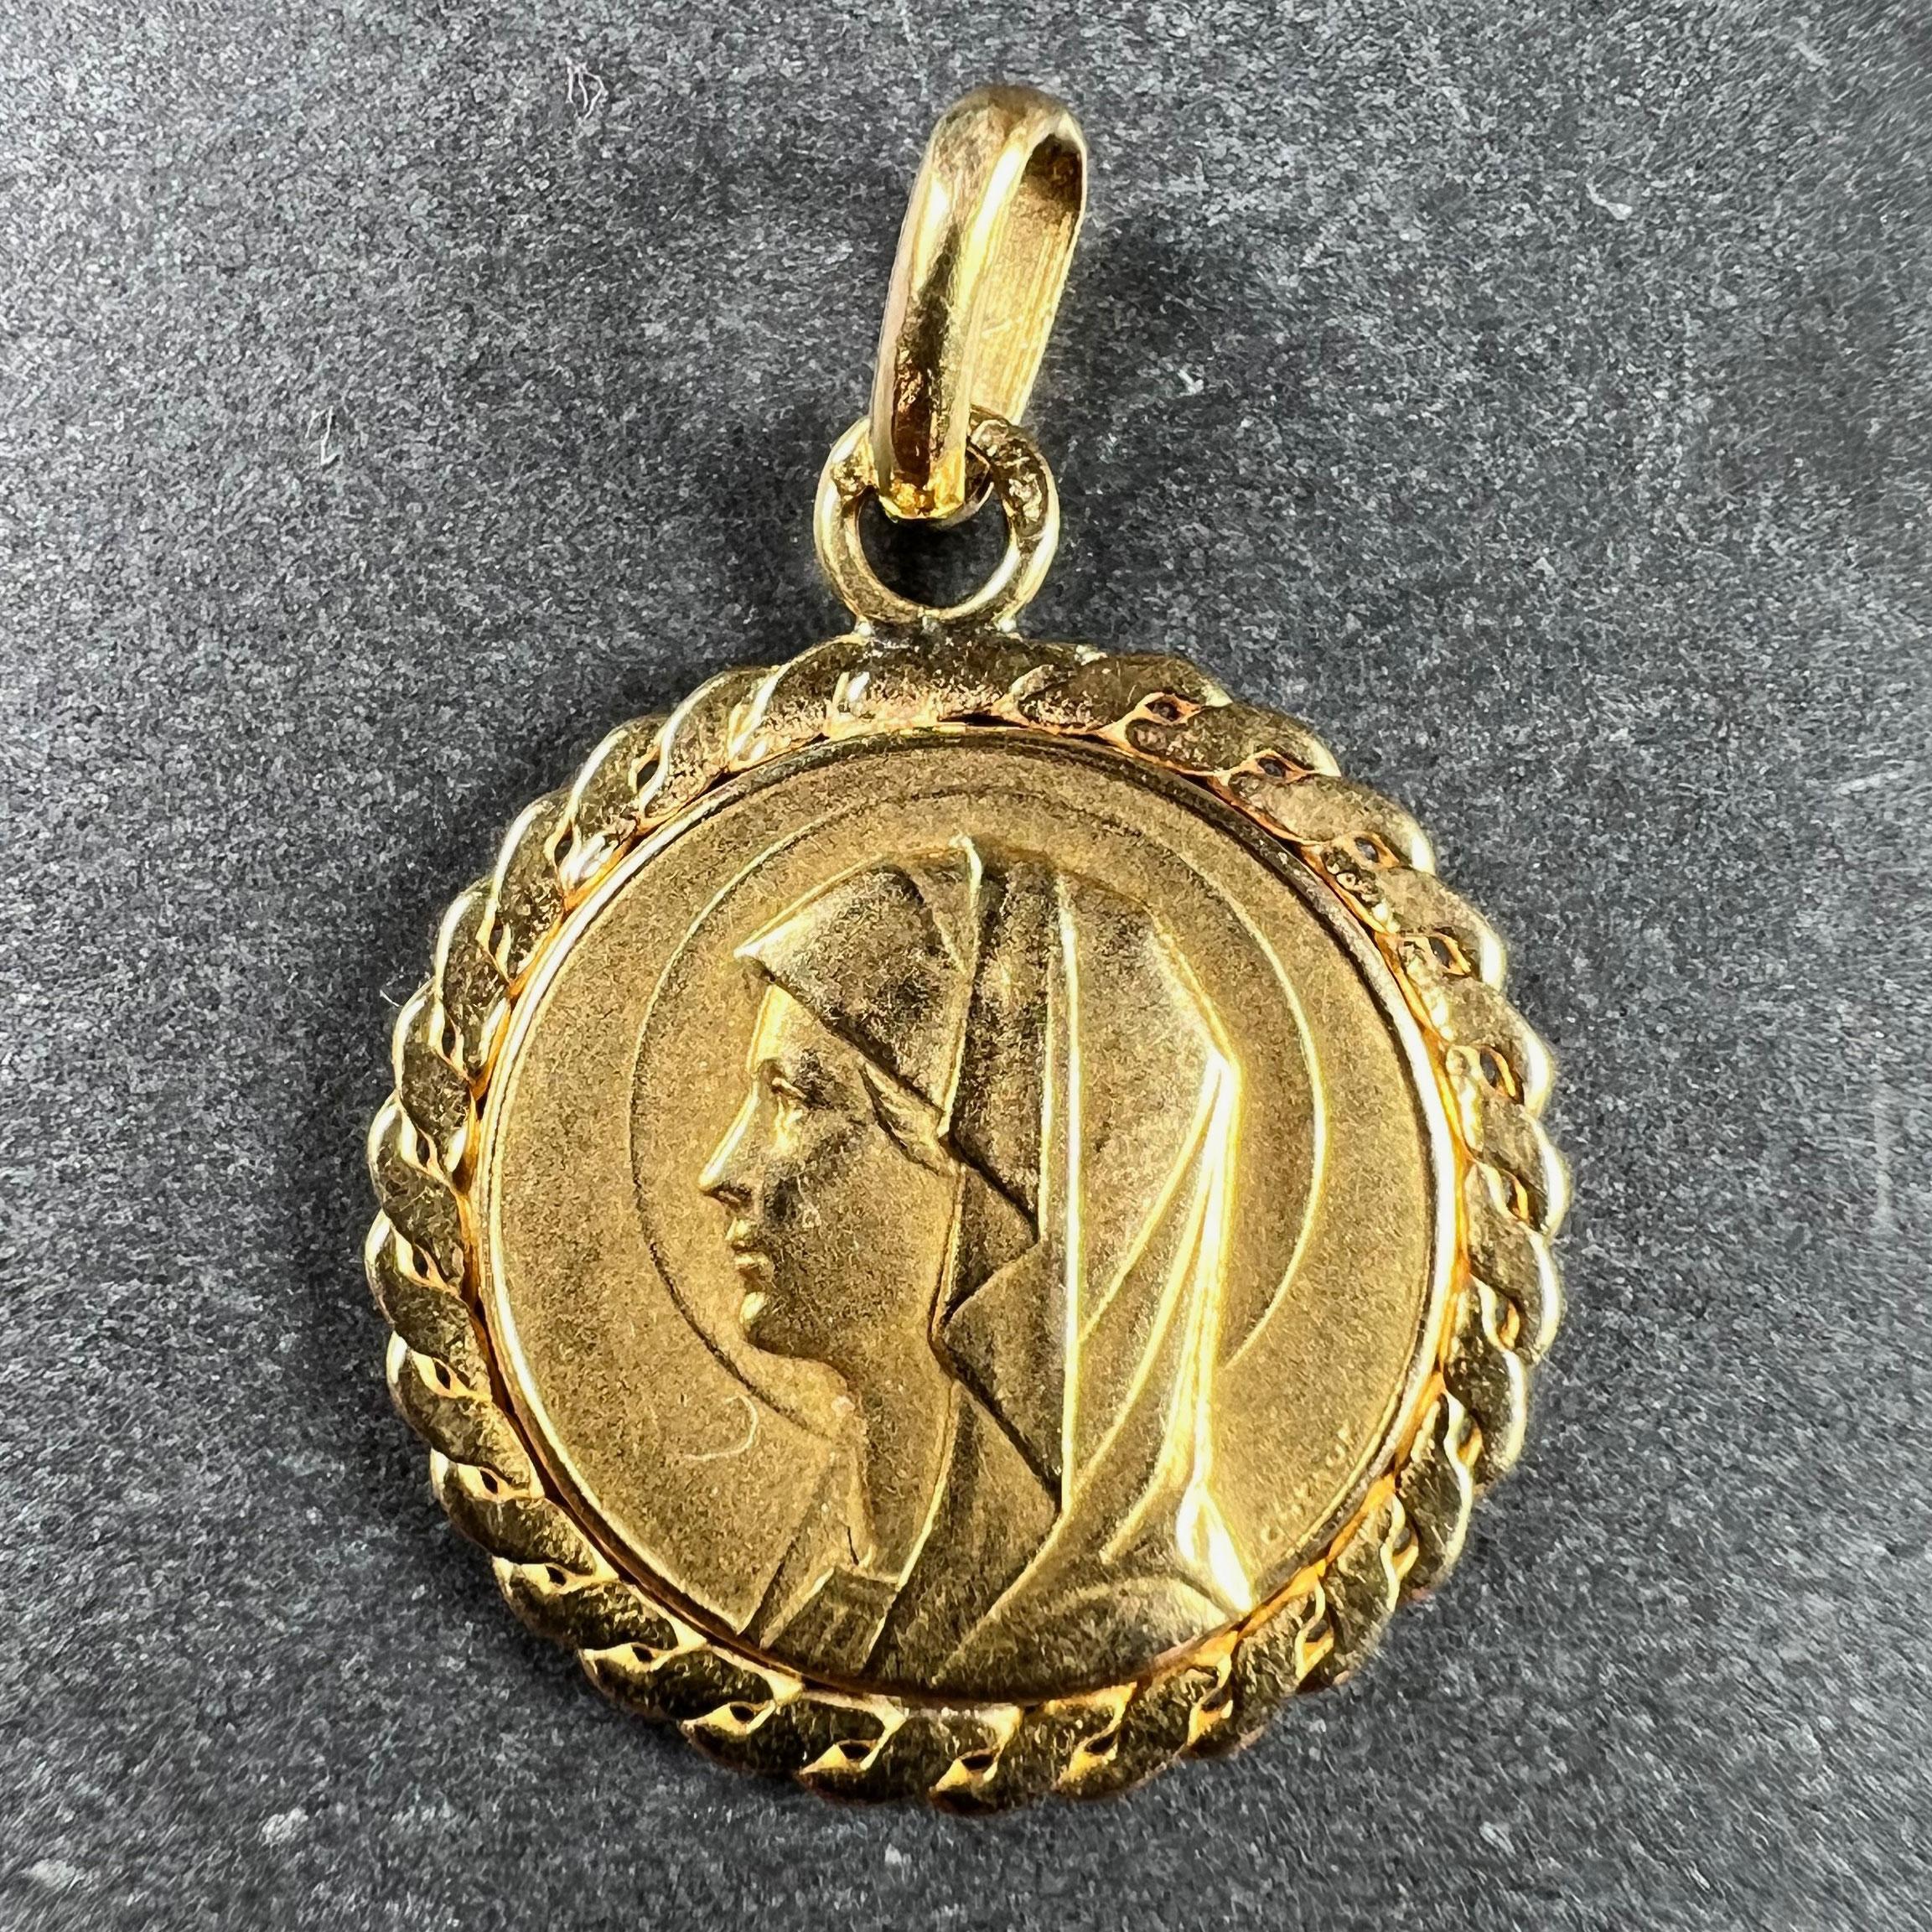 A French 18 karat (18K) yellow gold charm pendant designed as a medal depicting the Virgin Mary within a twisted frame. The reverse depicts a woman praying outside a grotto in which the Virgin Mary stands surrounded by roses and lilies. Stamped with